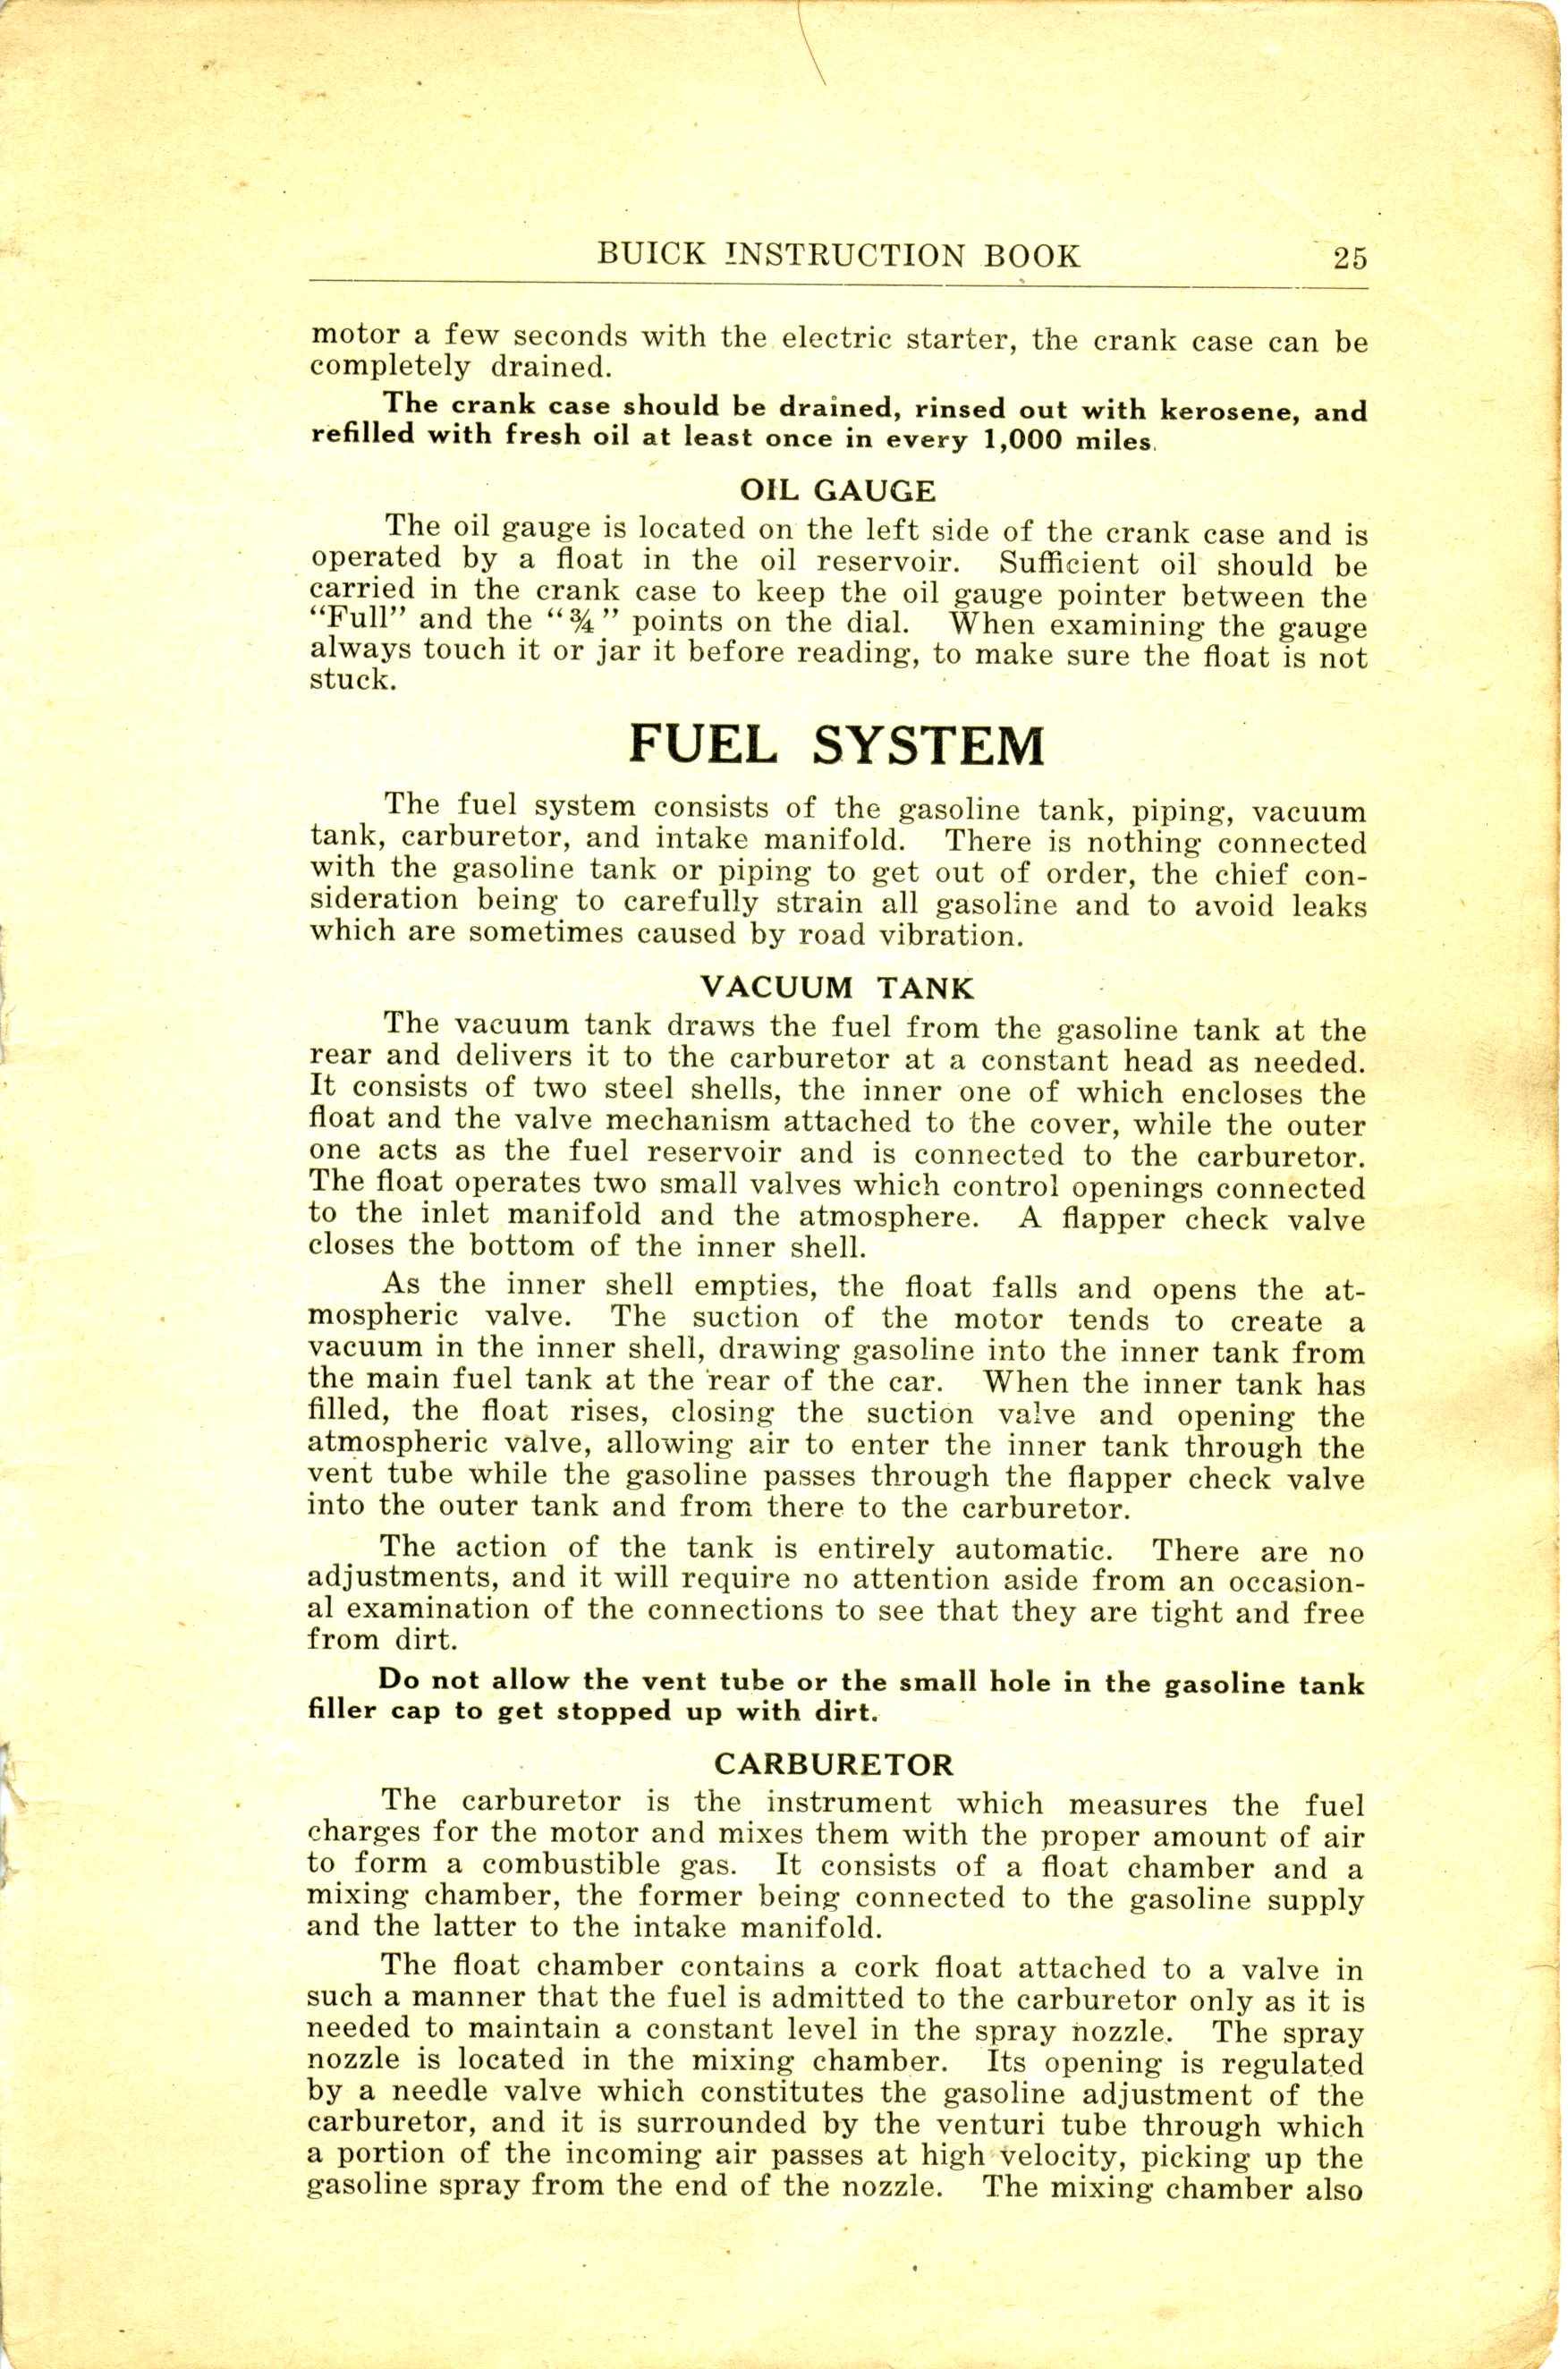 1918 Buick Instruction Book-4 Cyl-25